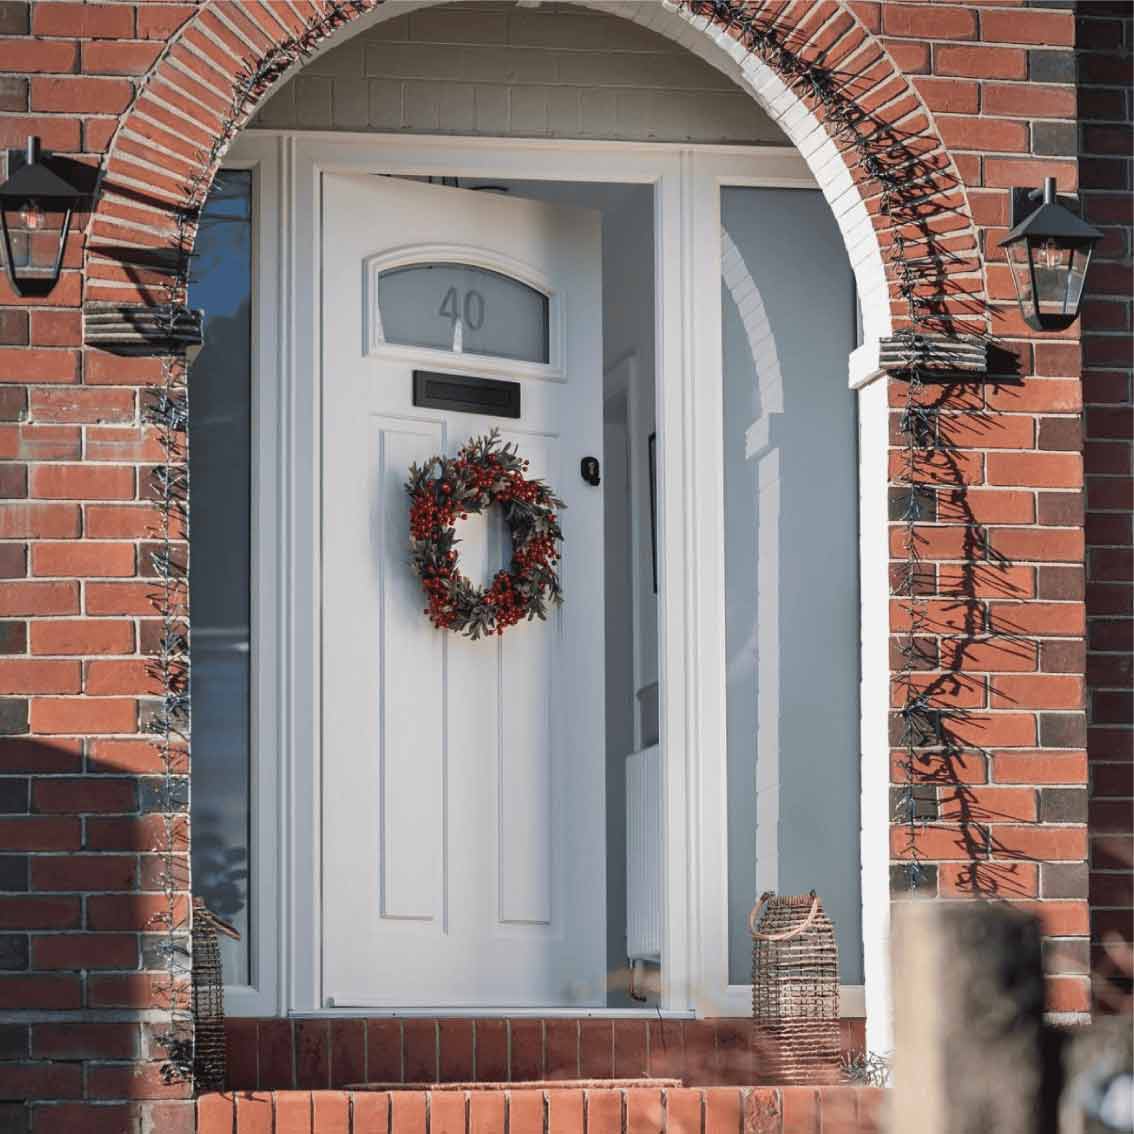 Comp door with side panel and wreath